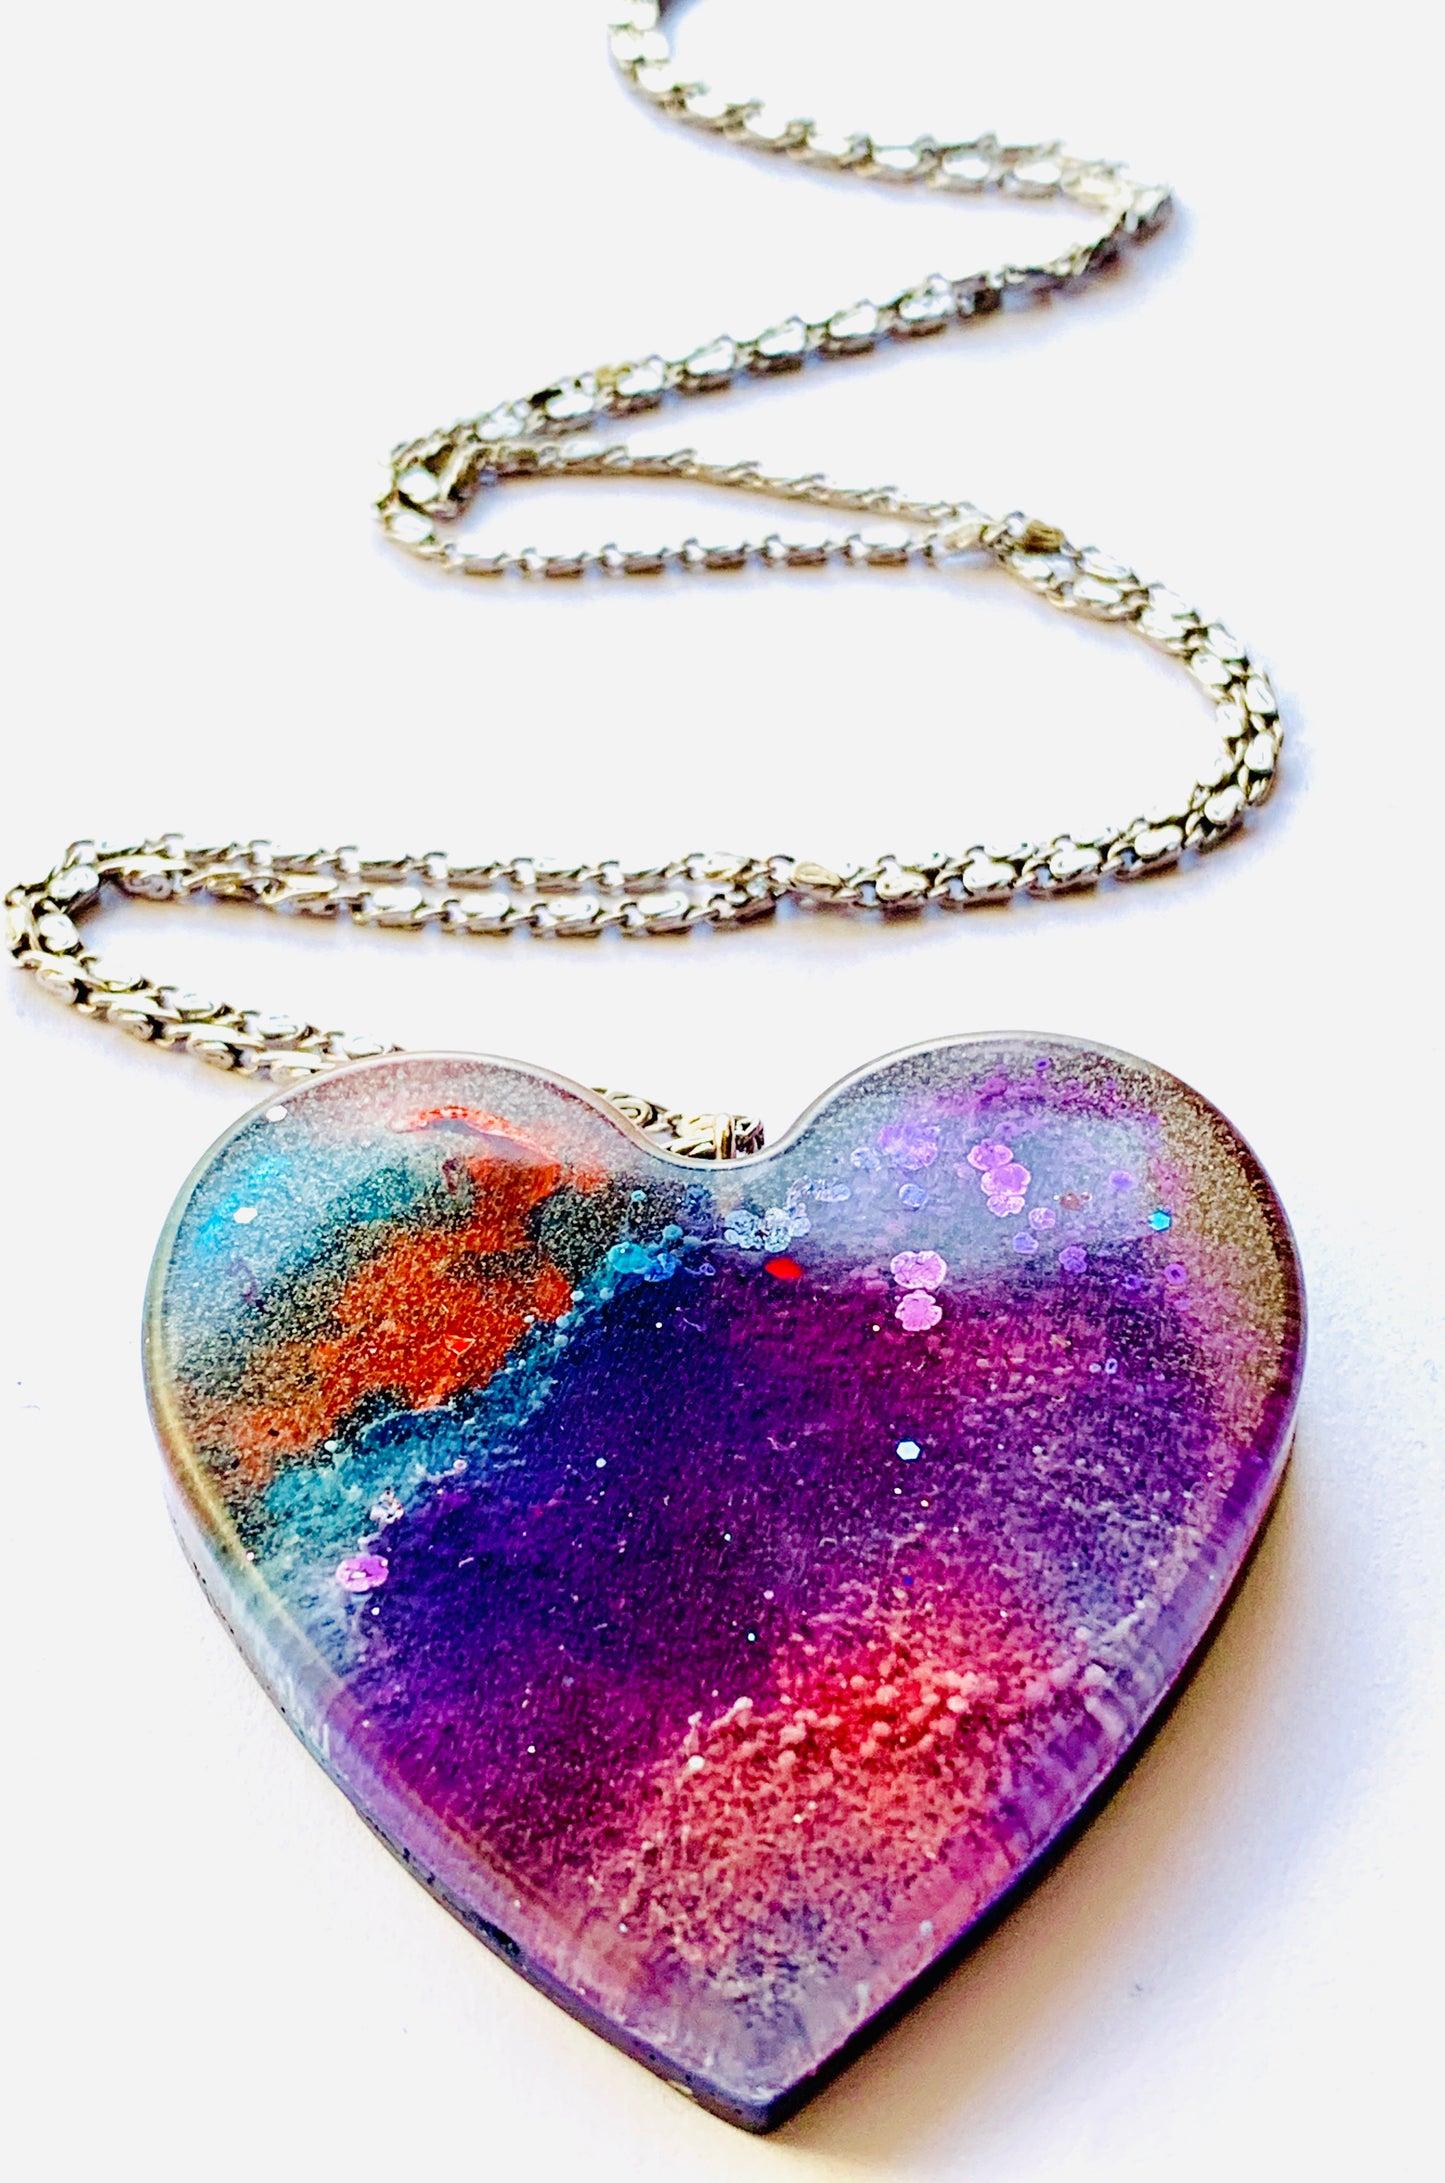 Large Alcohol Ink Resin Necklace